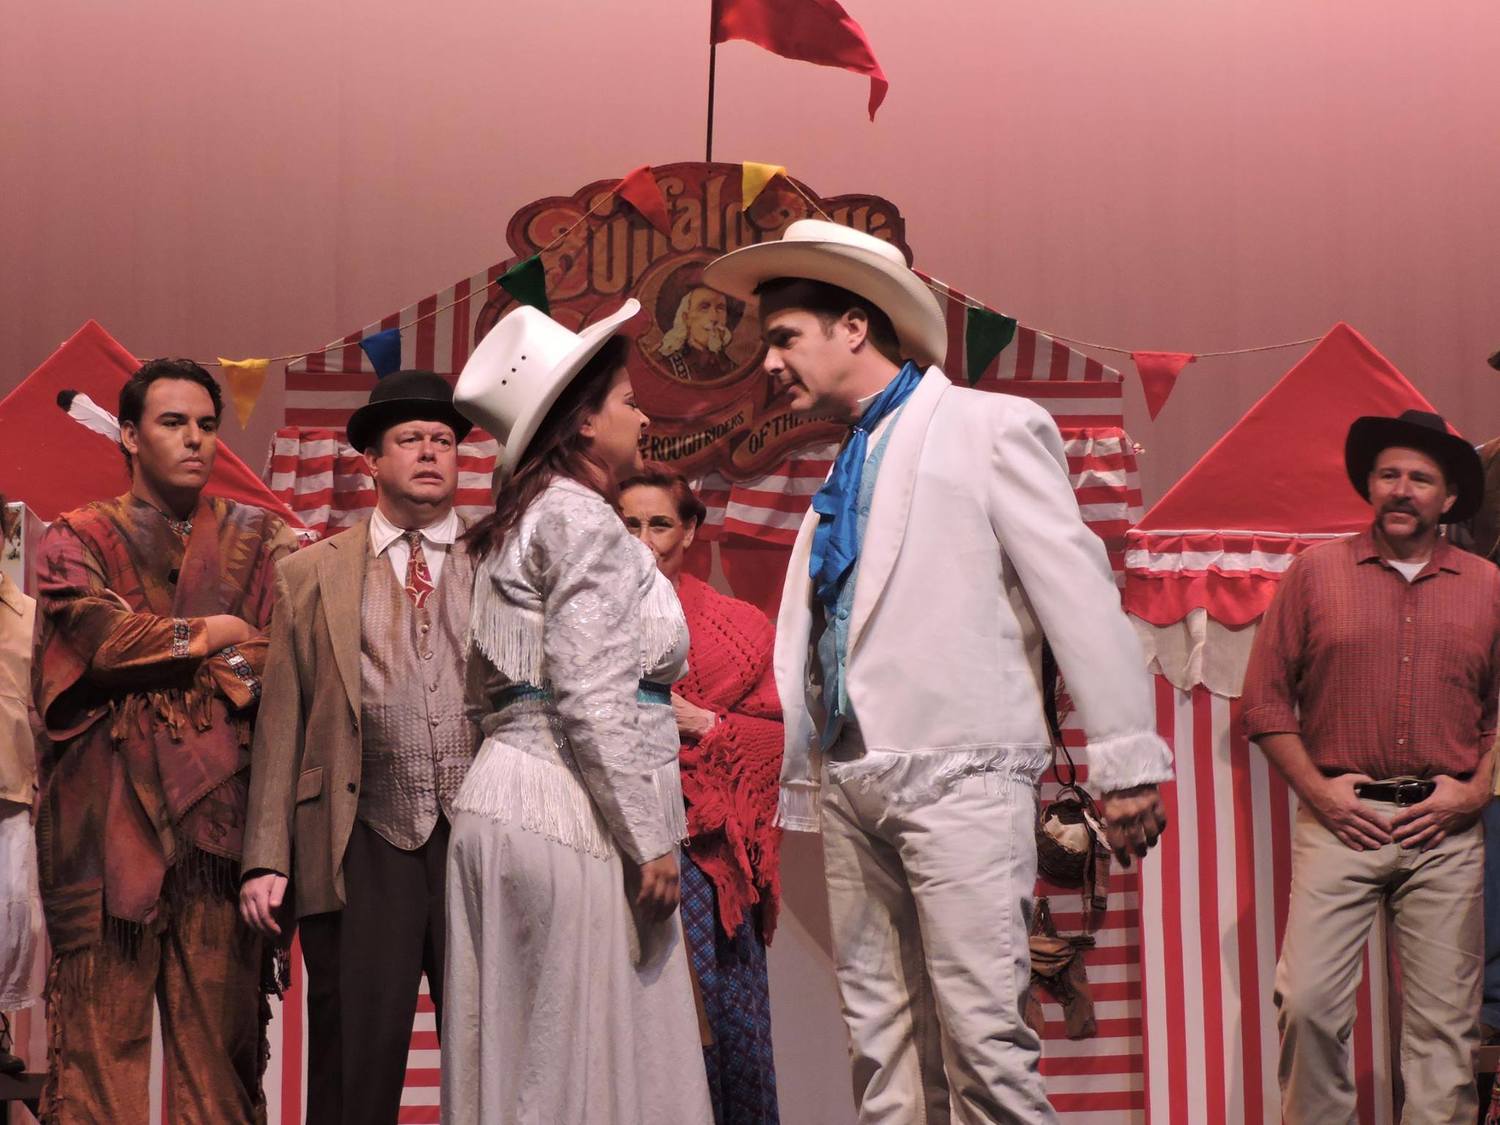 Jordana Forrest as Annie Oakley and James Skiba as Frank Butler in the Curtain Call Playhouse production of Annie Get Your Gun. https://www.facebook.com/events/400787620075871/?ref_dashboard_filter=upcoming 1